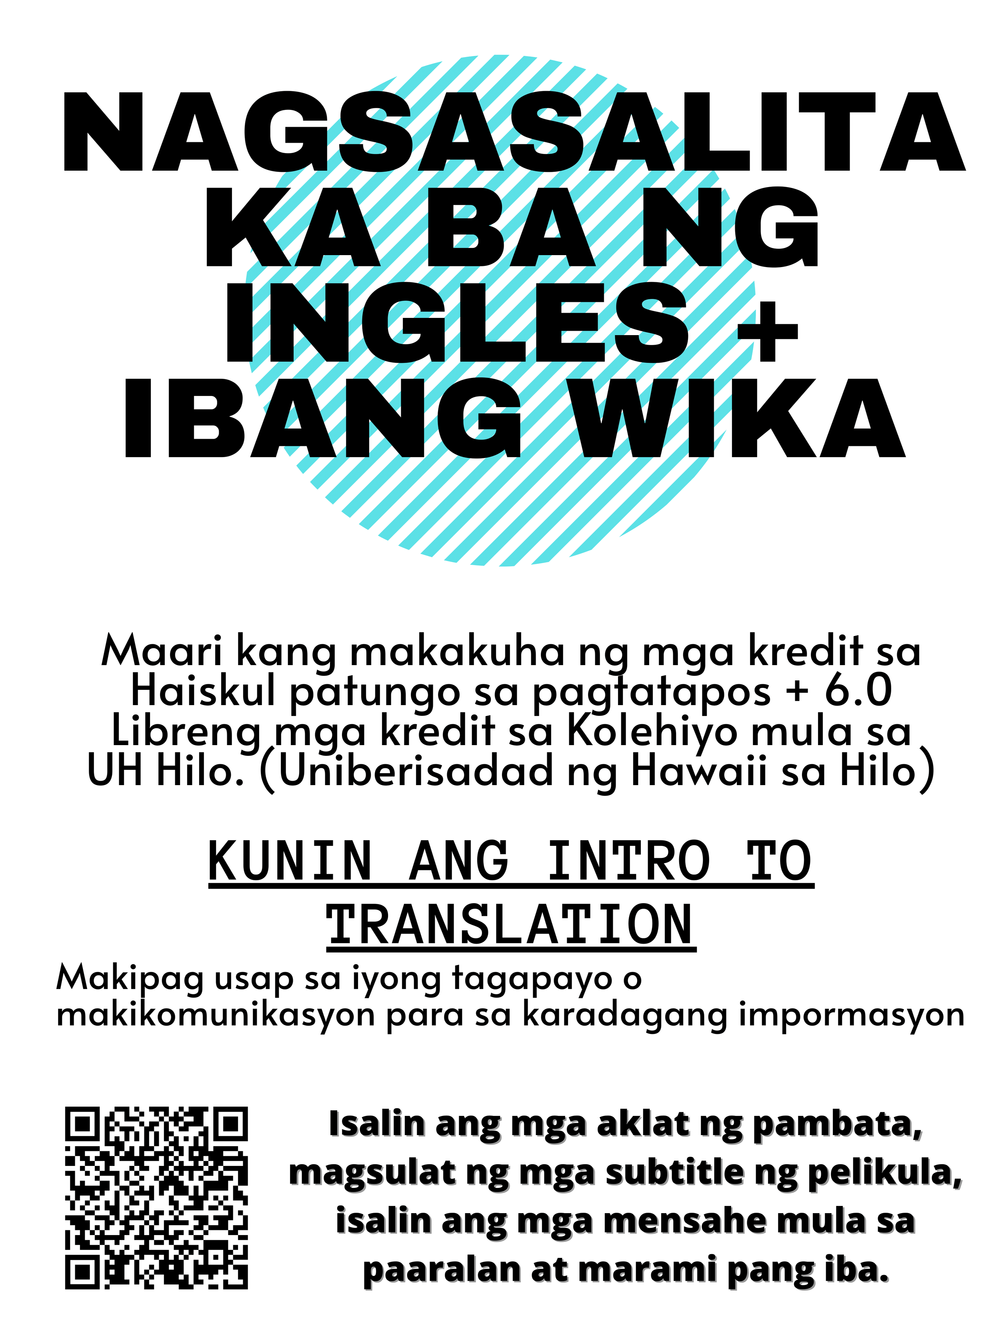 Translation Class Posters Multiple Languages-5.png